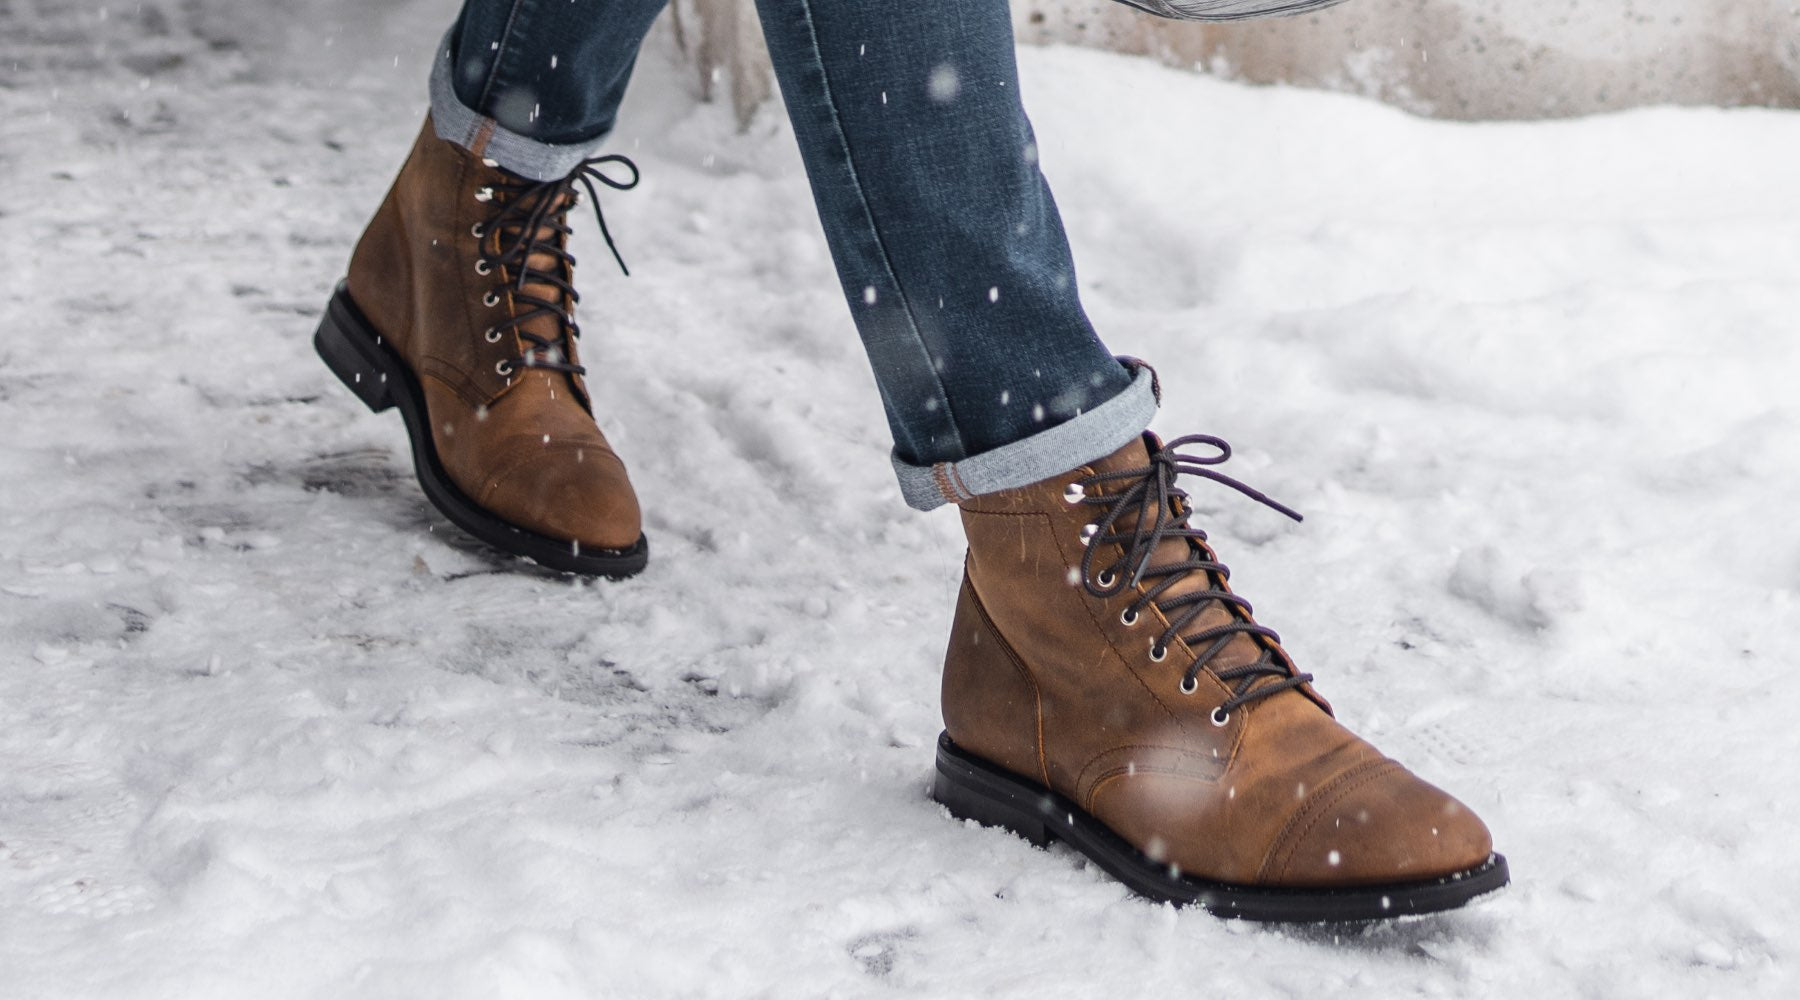 What Makes a Great Winter Boot